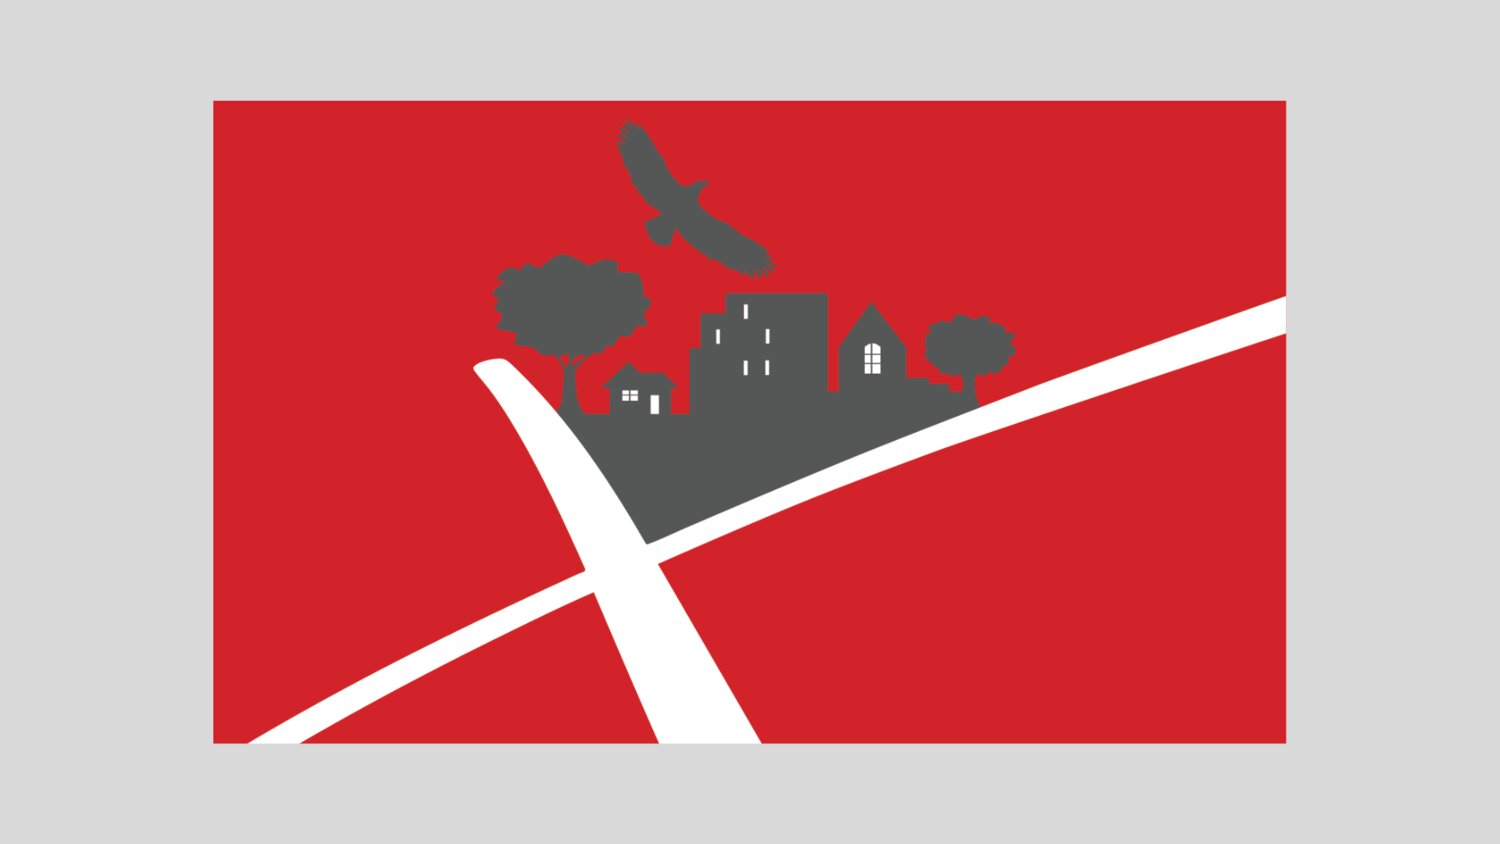 The city's current flag was adopted in 2018.